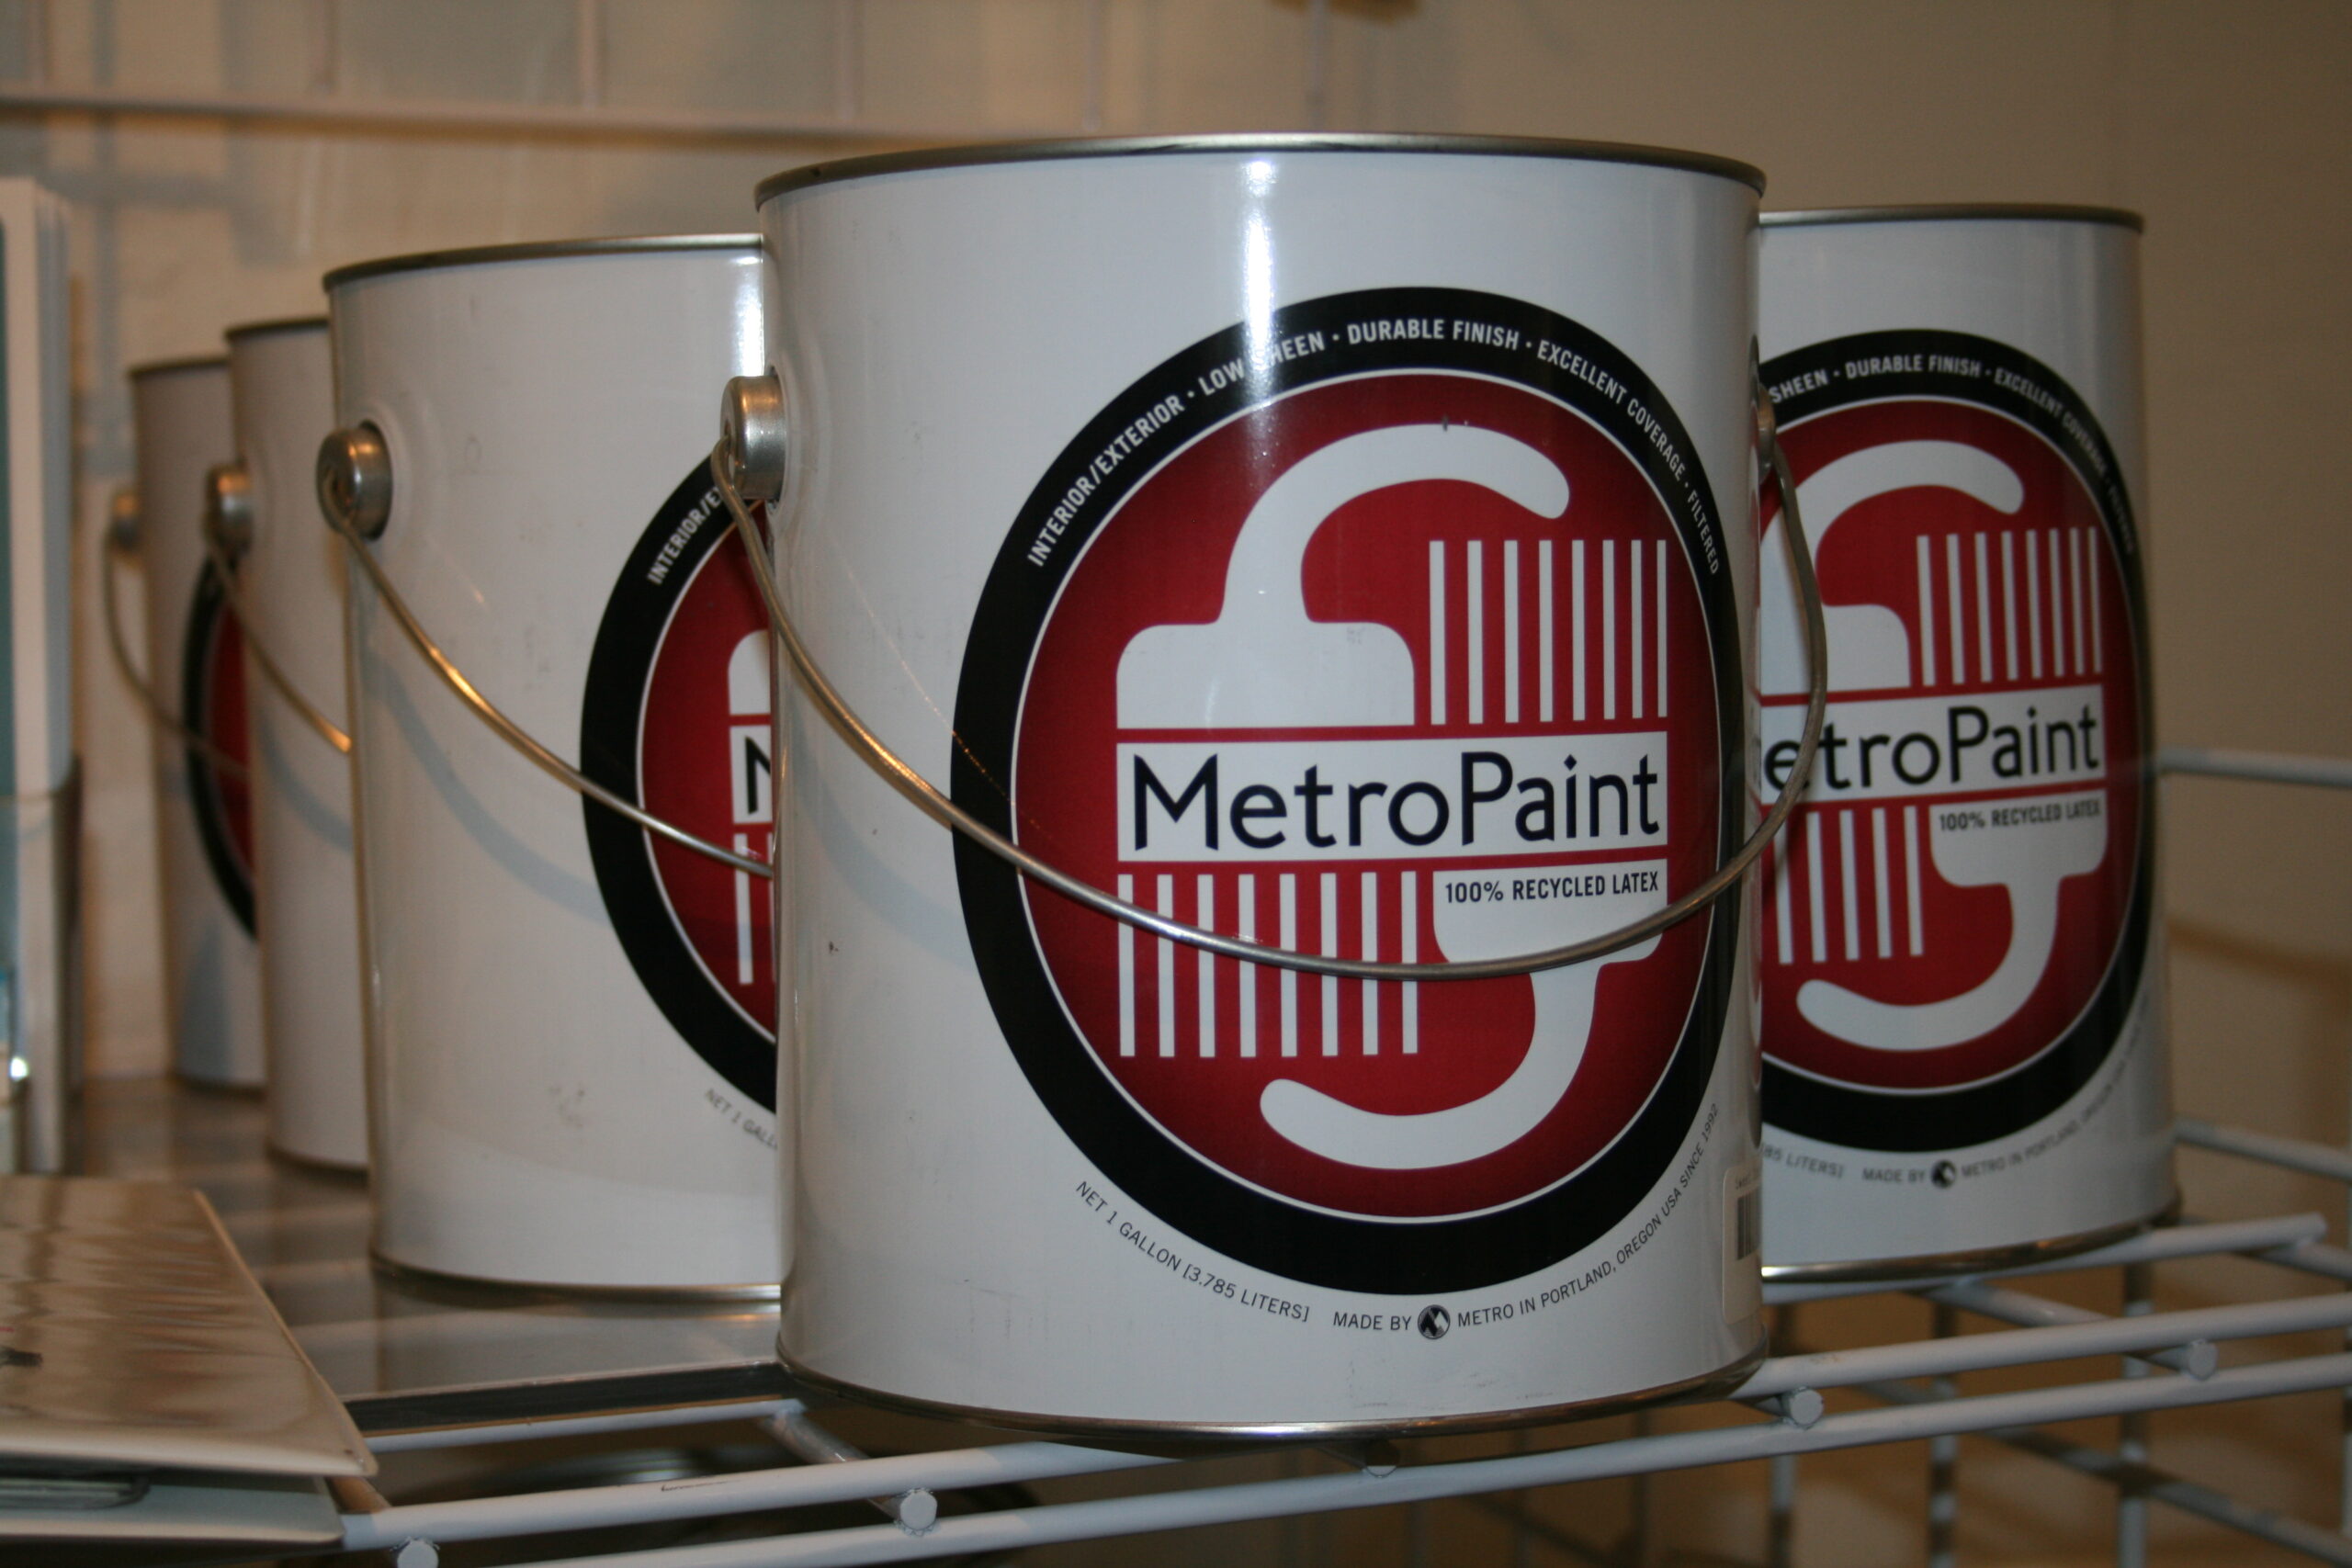 Metro Paint from Eco Depot